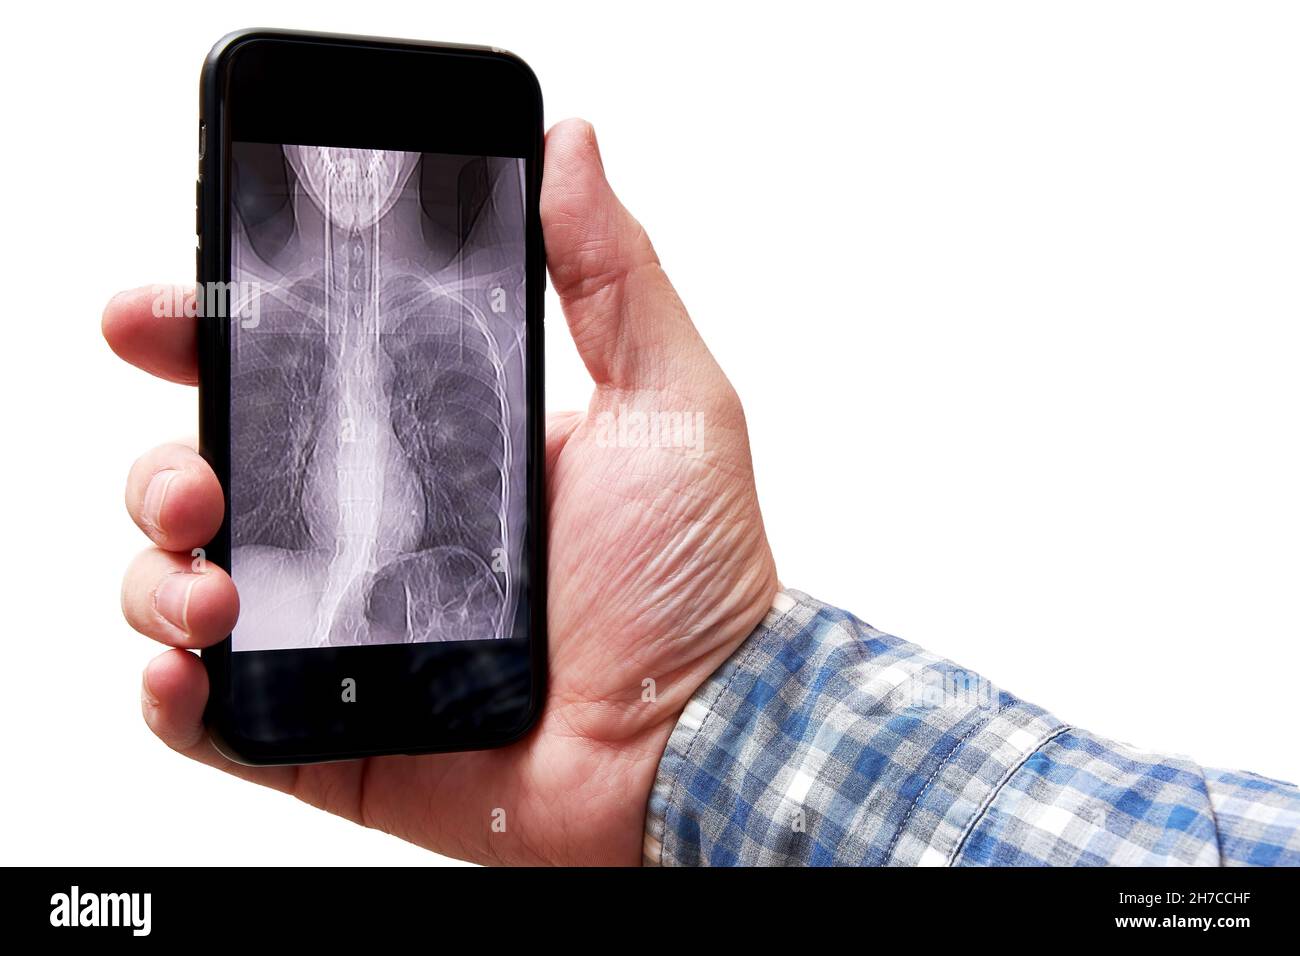 Man's hand holding a mobile phone with a CT scan image of lungs. Pneumonia and disease diagnosis Stock Photo